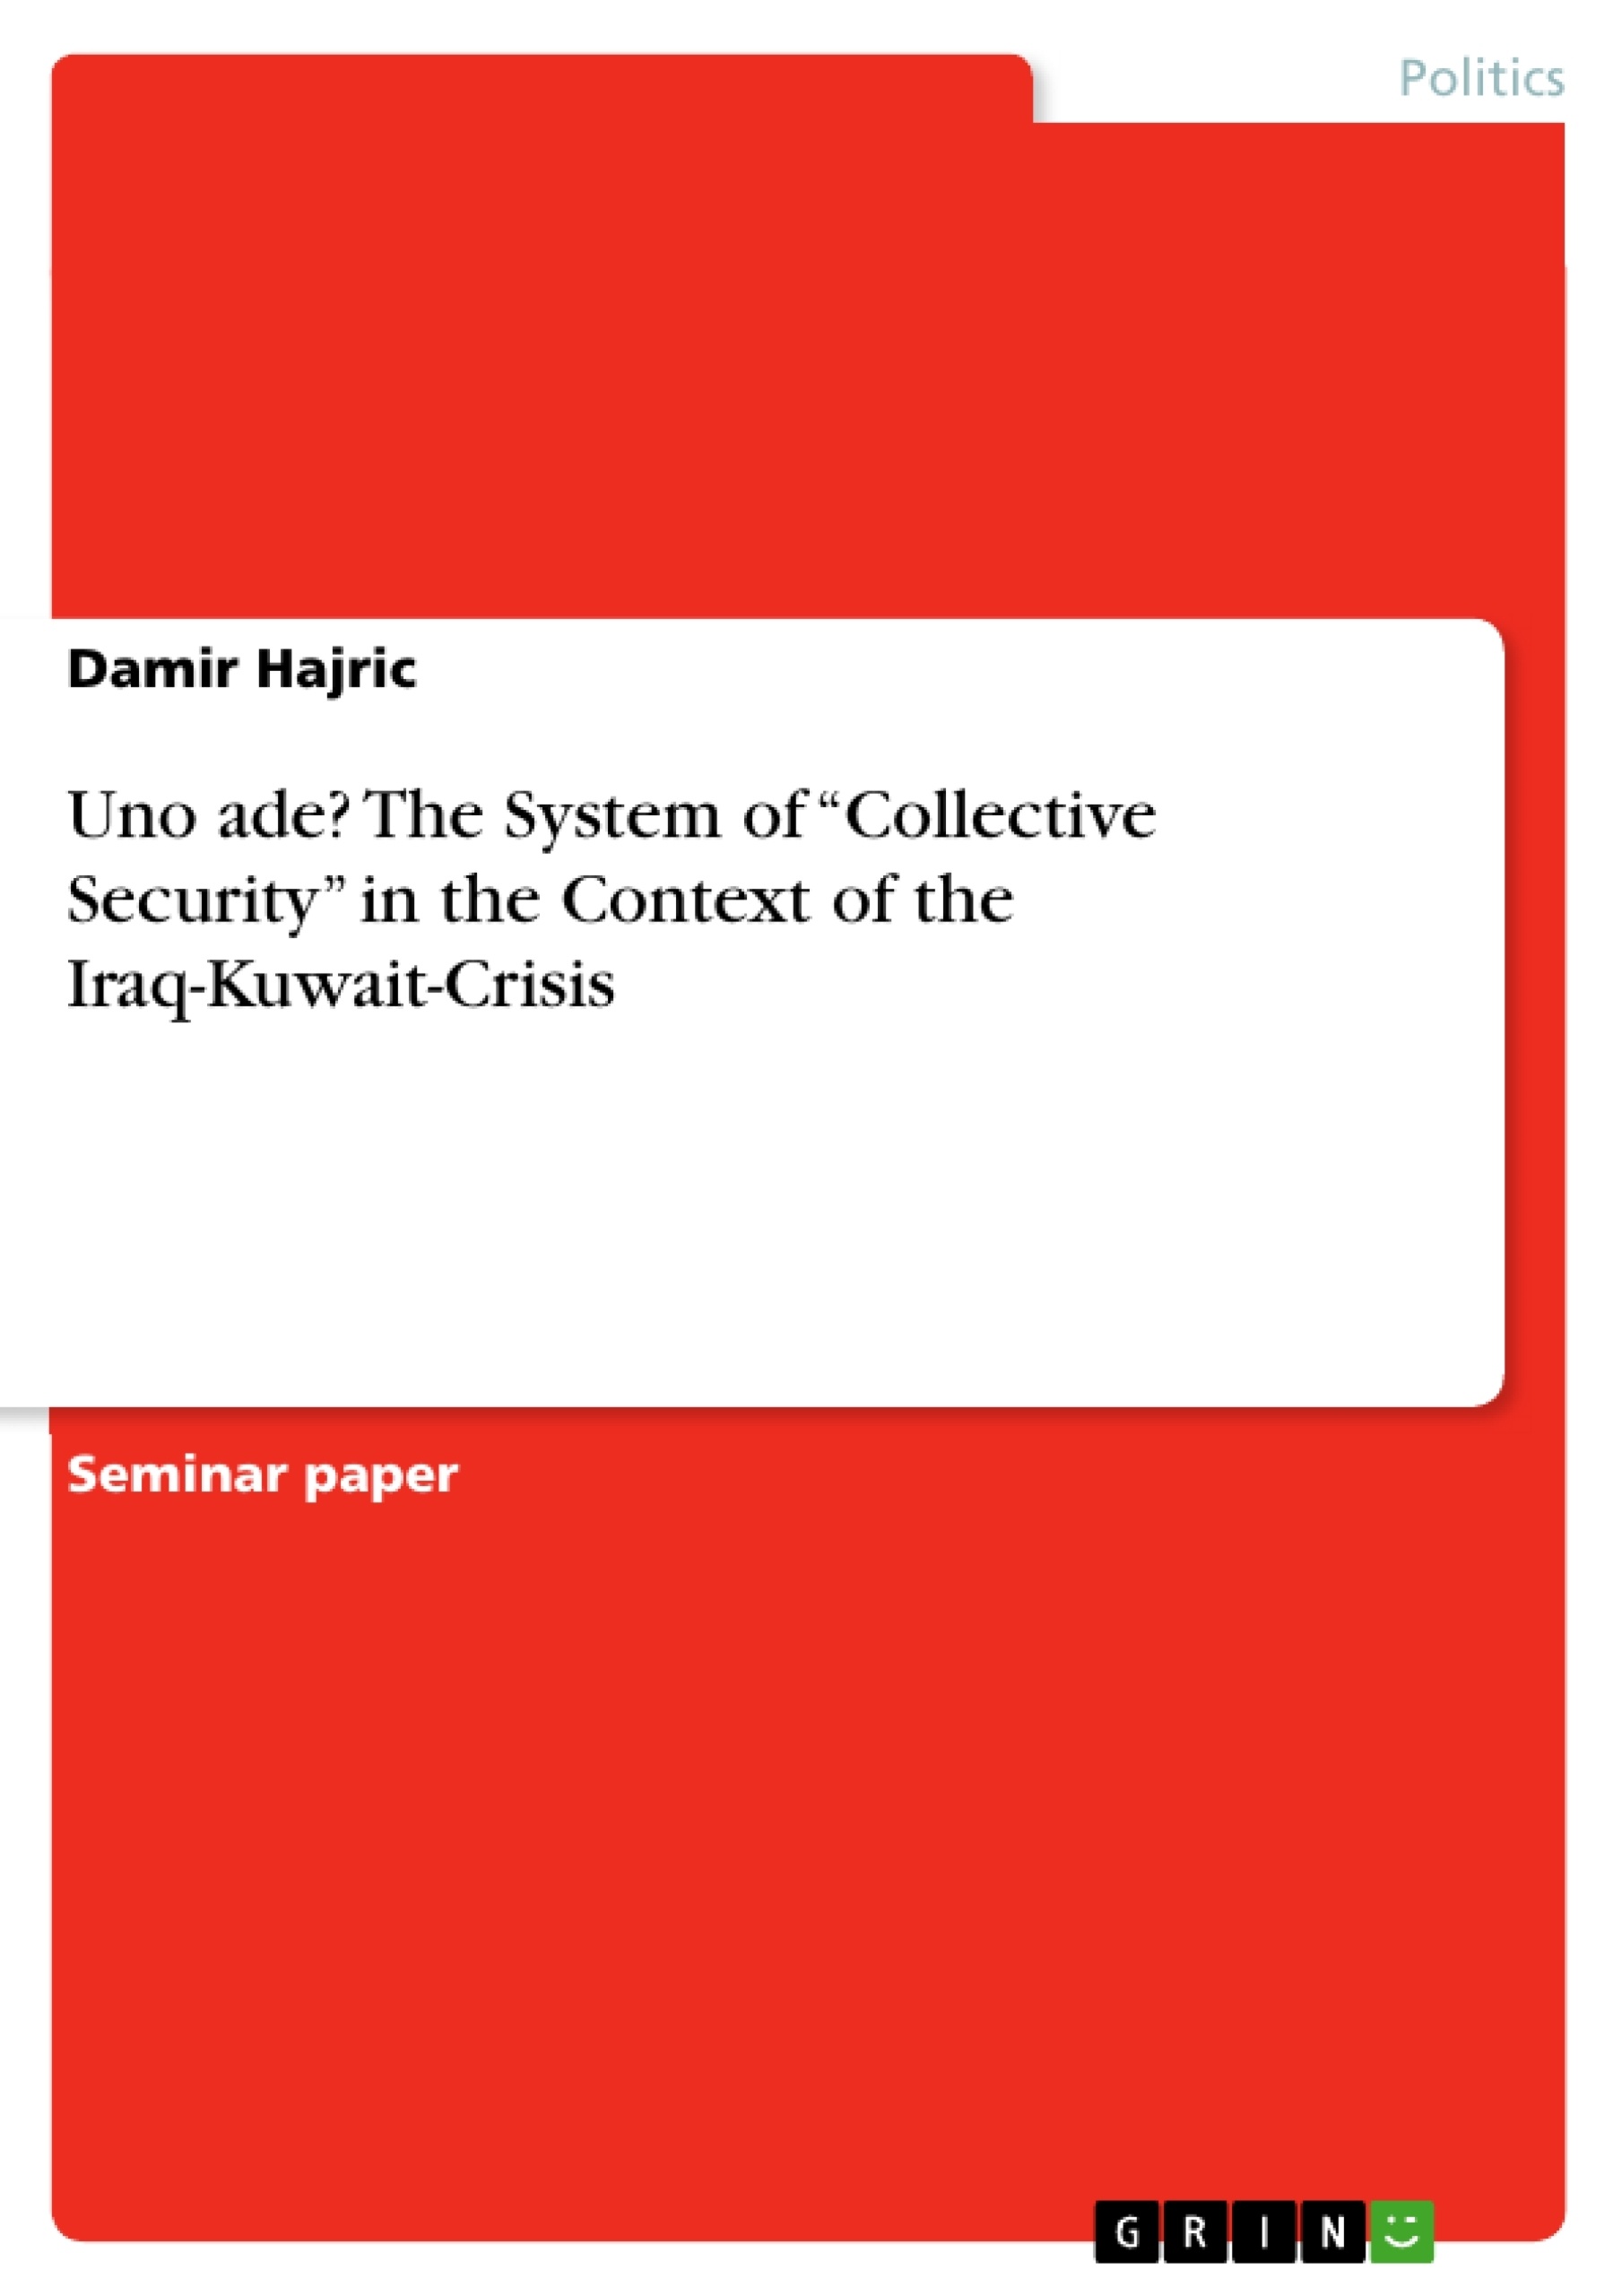 Titre: Uno ade? The System of “Collective Security” in the Context of the Iraq-Kuwait-Crisis